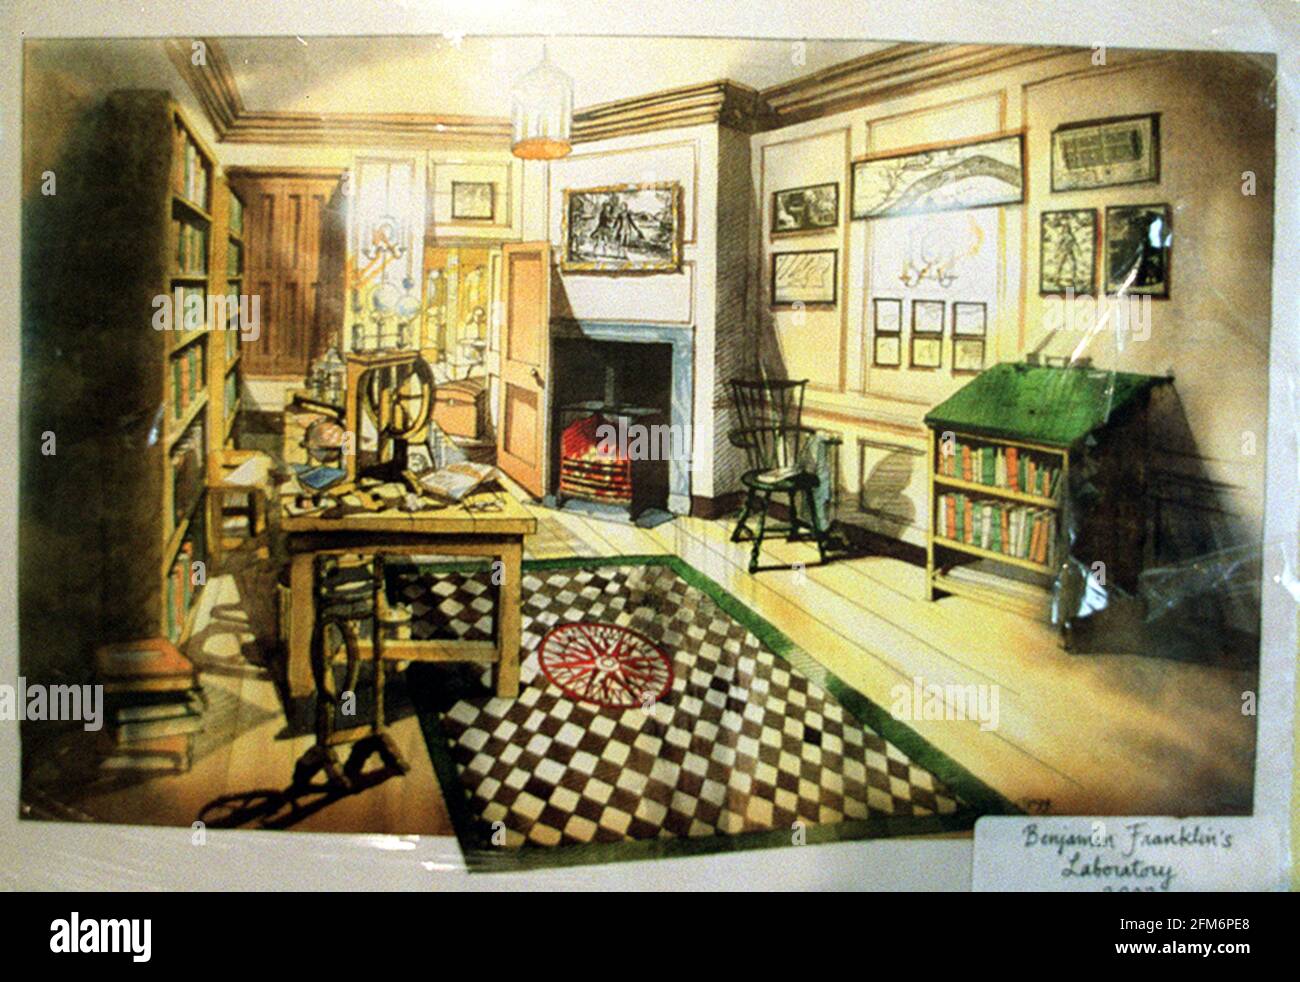 BENJAMIN FRANKLIN JUNE 2001 THE HOUSE THAT BENJAMIN FRANKLIN LIVIED IN, IN LONDON. AN IMPRESSION OF WHAT THE RE-CREATION WILL LOOK LIKE IN THE LABORATORY. Stock Photo